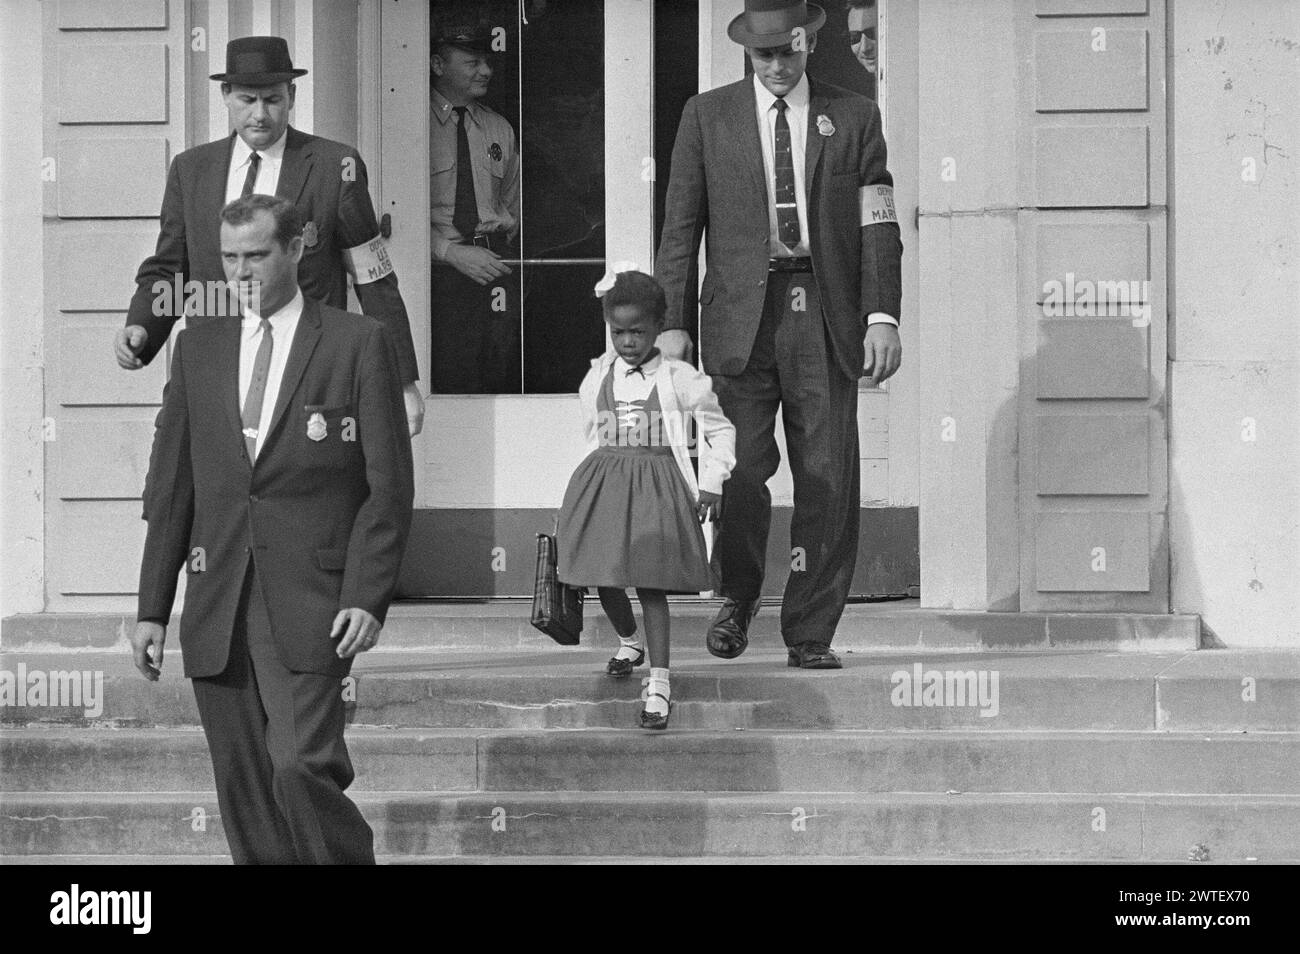 Due to threats and violence against her, U.S. Marshals escorted 6-year-old Ruby Bridges to and from the previously whites only William Frantz Elementary School in New Orleans, 1960. As soon as Bridges entered the school, white parents pulled their children out. Stock Photo